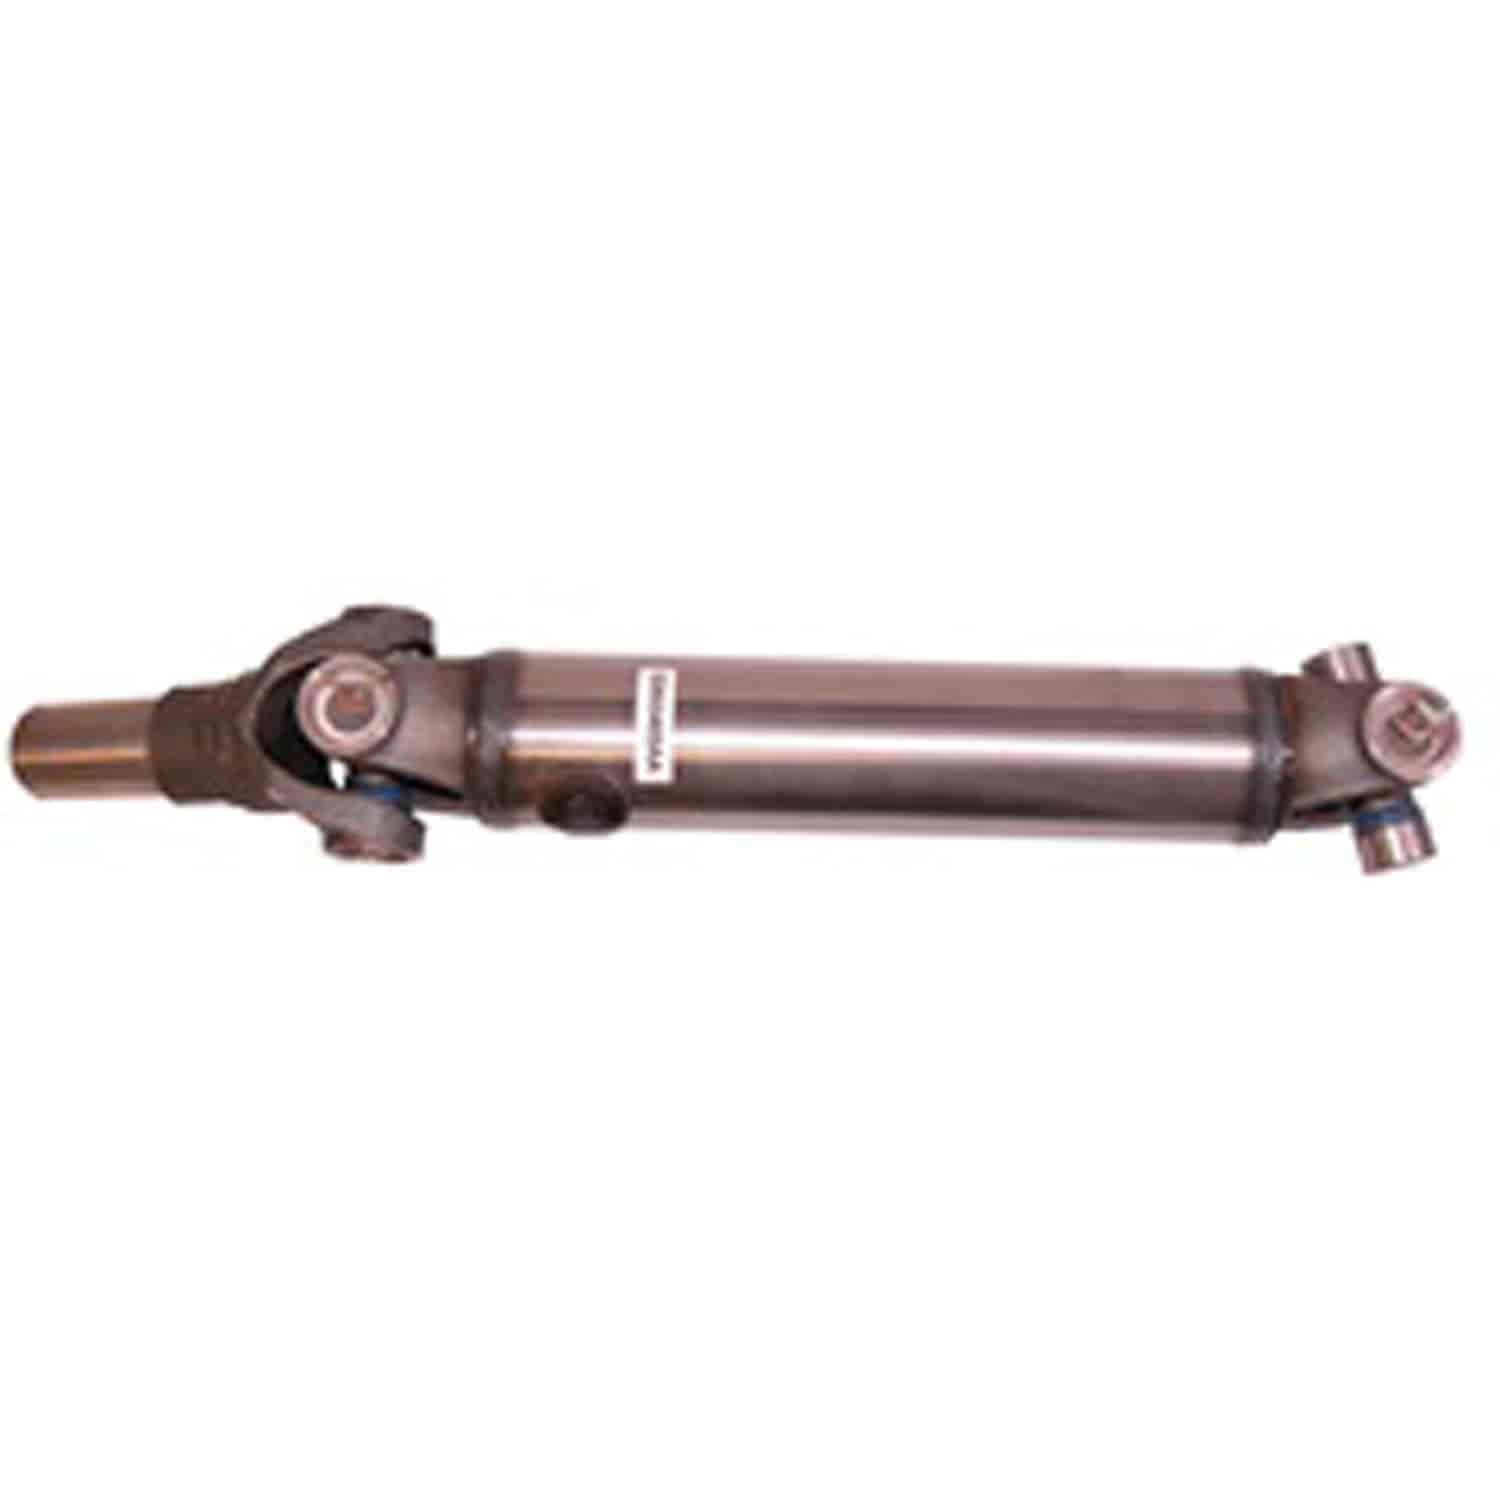 Stock replacement rear driveshaft from Omix-ADA, Fits 03-06 Jeep Wrangler TJ with an automatic transmission.